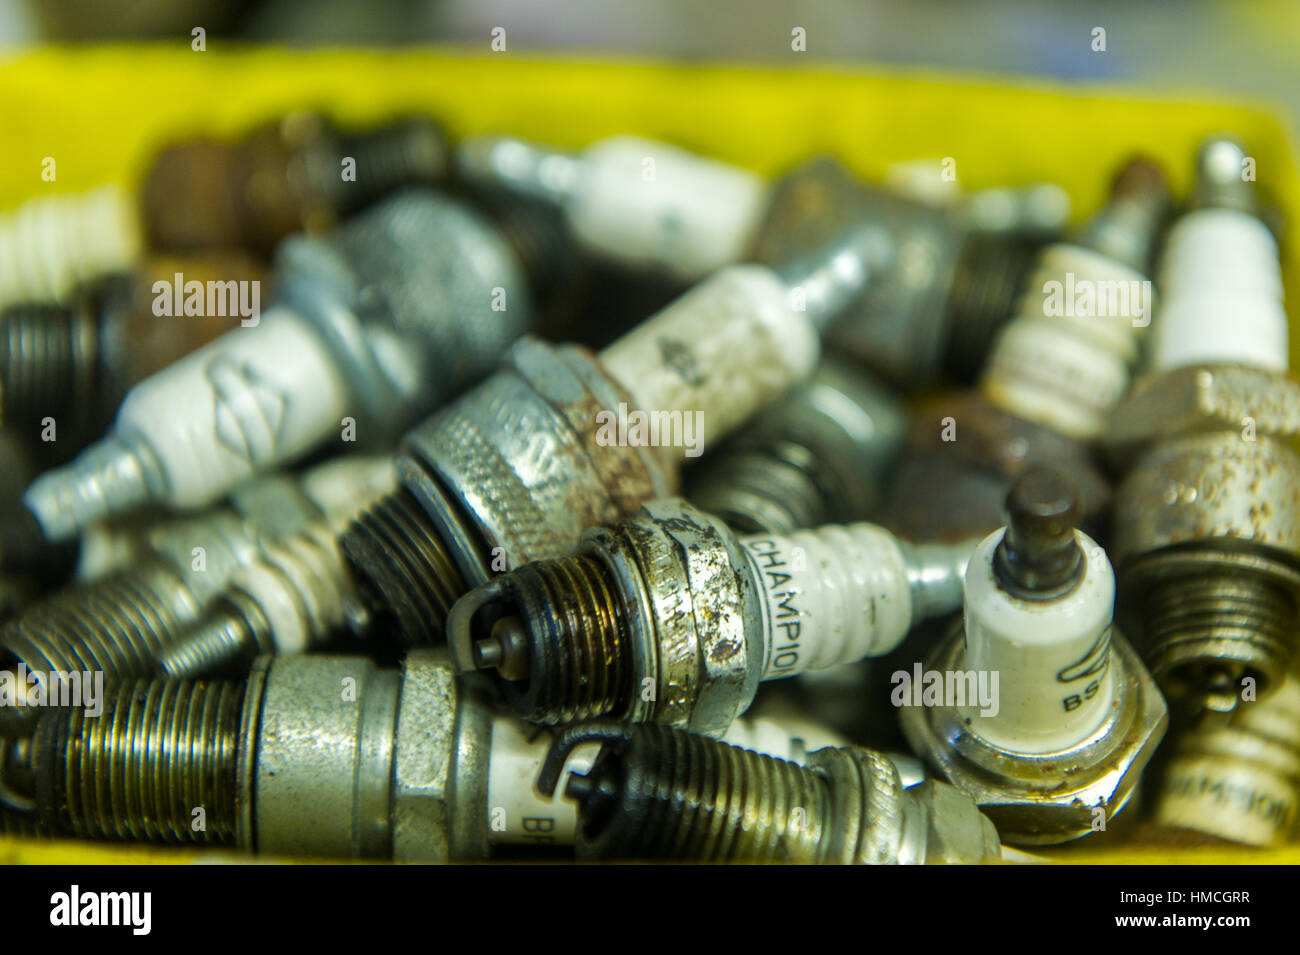 Container full of used spark plugs for cars. Stock Photo